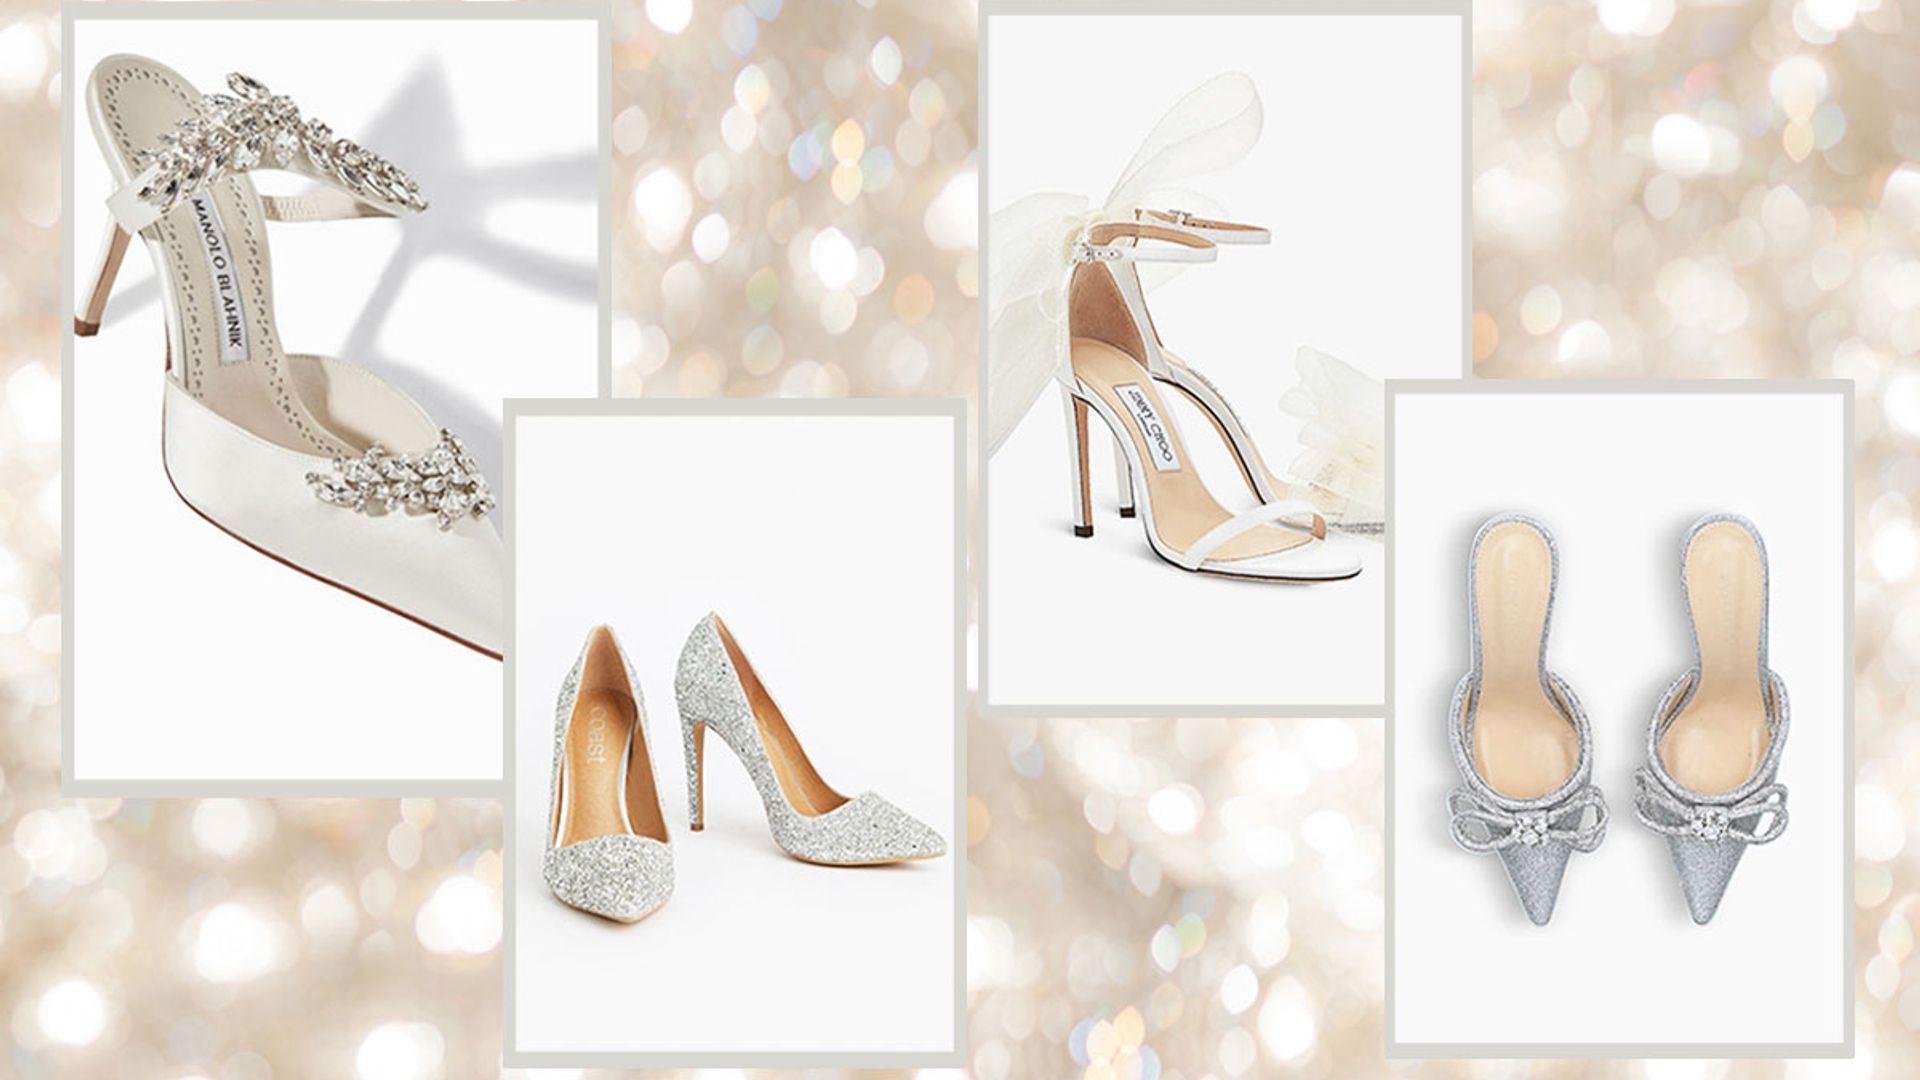 Best places to buy wedding shoes 2022: From Manolo Blahnik to Dune, Jimmy Choo & Coast